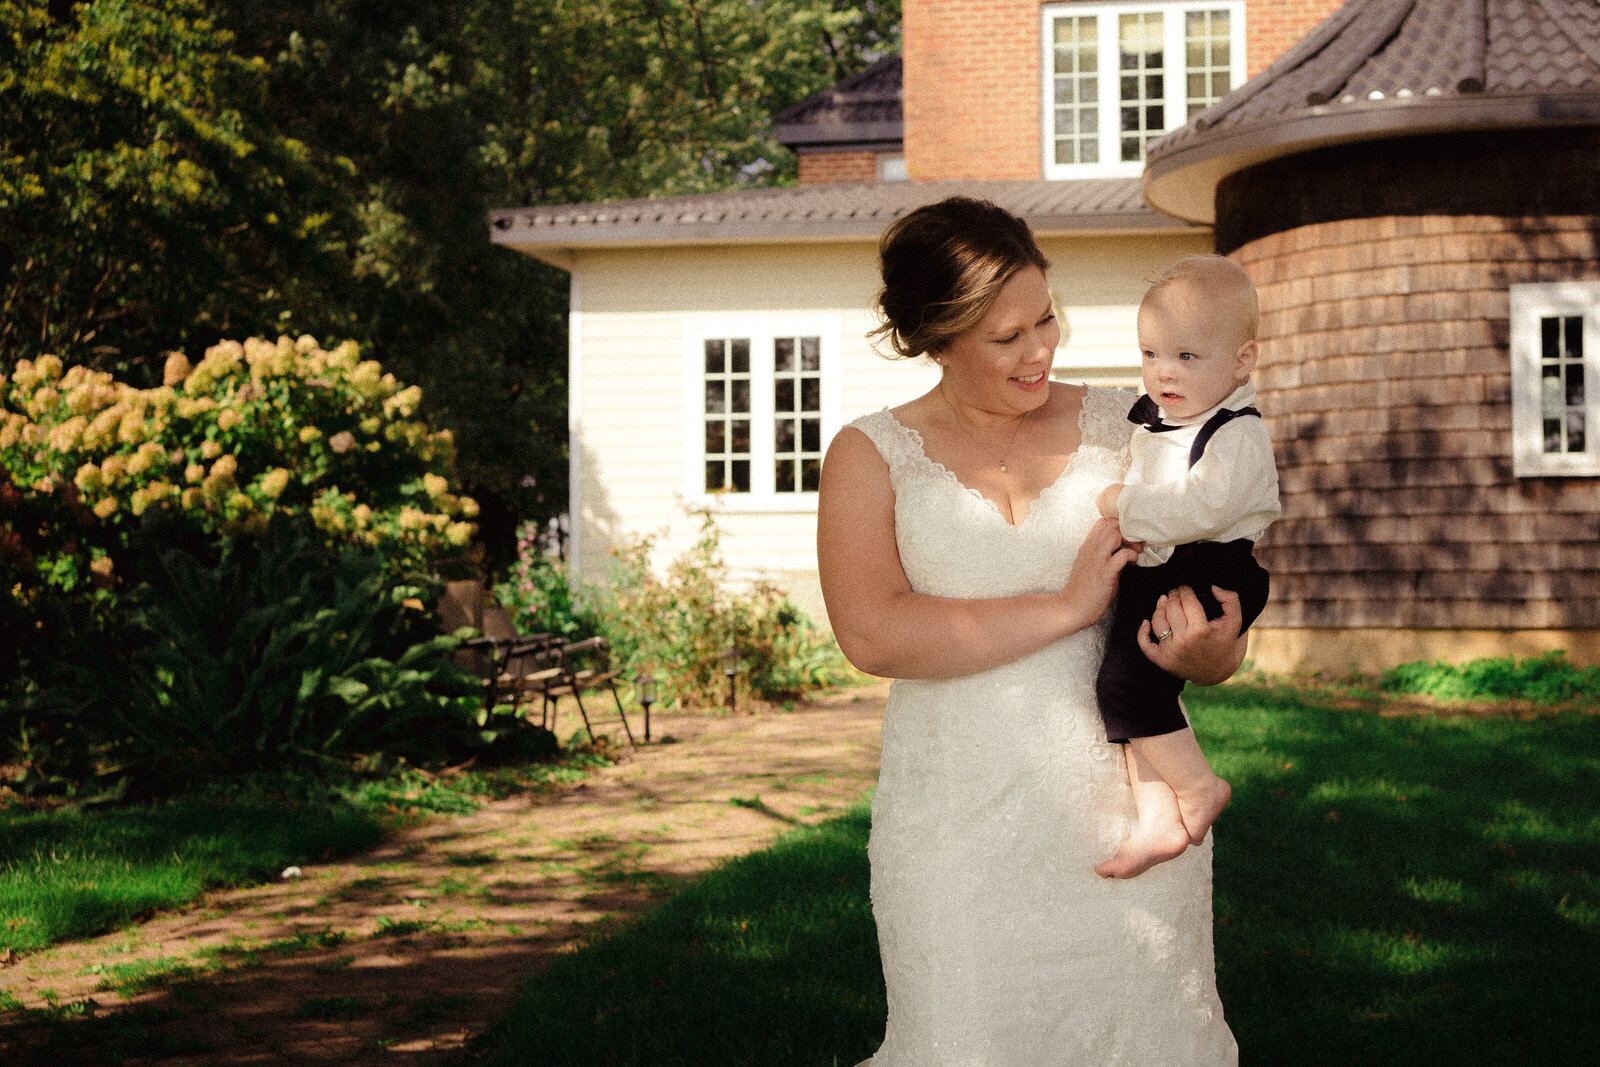 photojournalistic image of bride holding her son, the ring bearer.